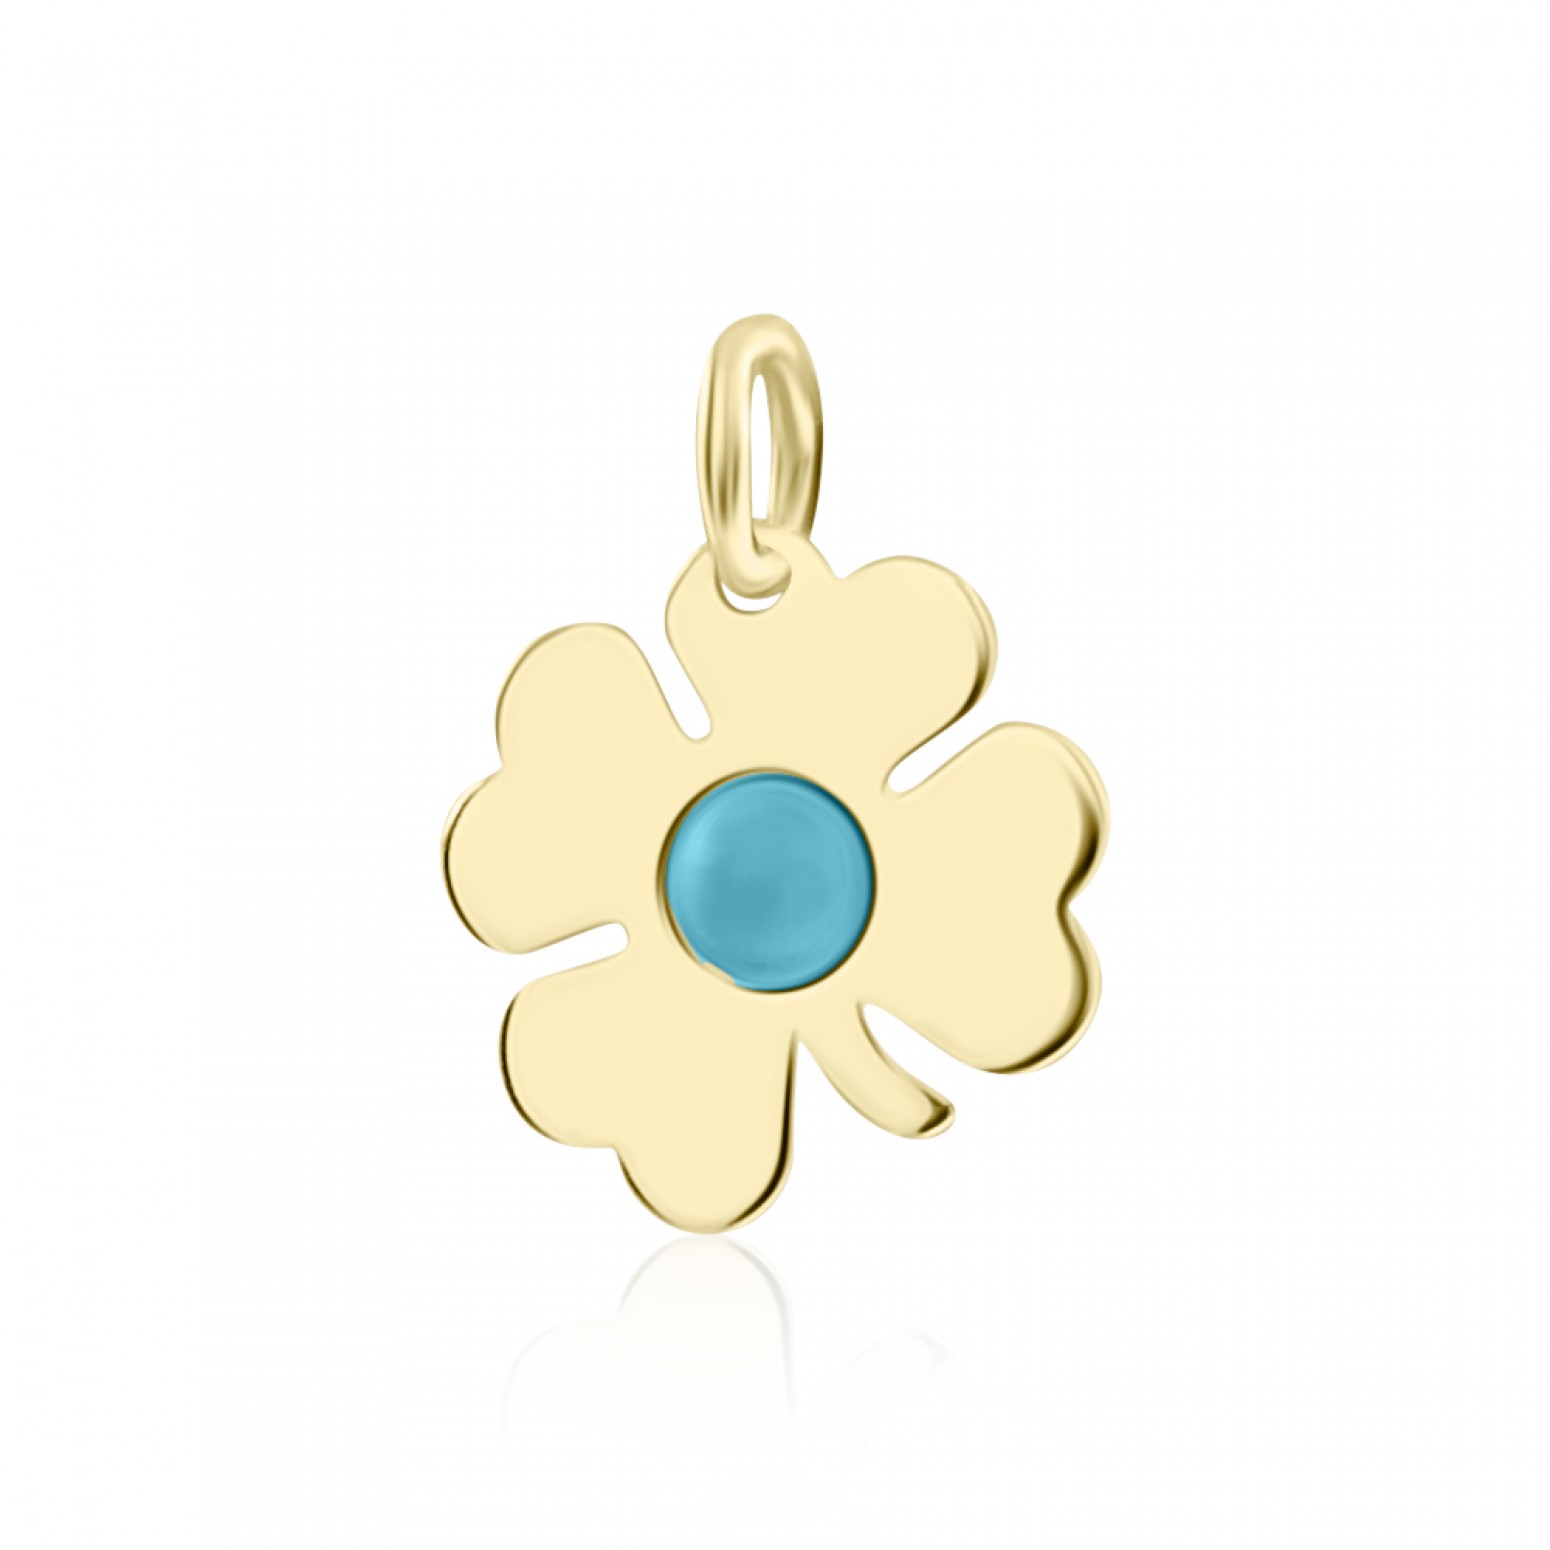 Babies pendant K14 gold with four-leaf clover and turquoise, pm0184 BABIES Κοσμηματα - chrilia.gr